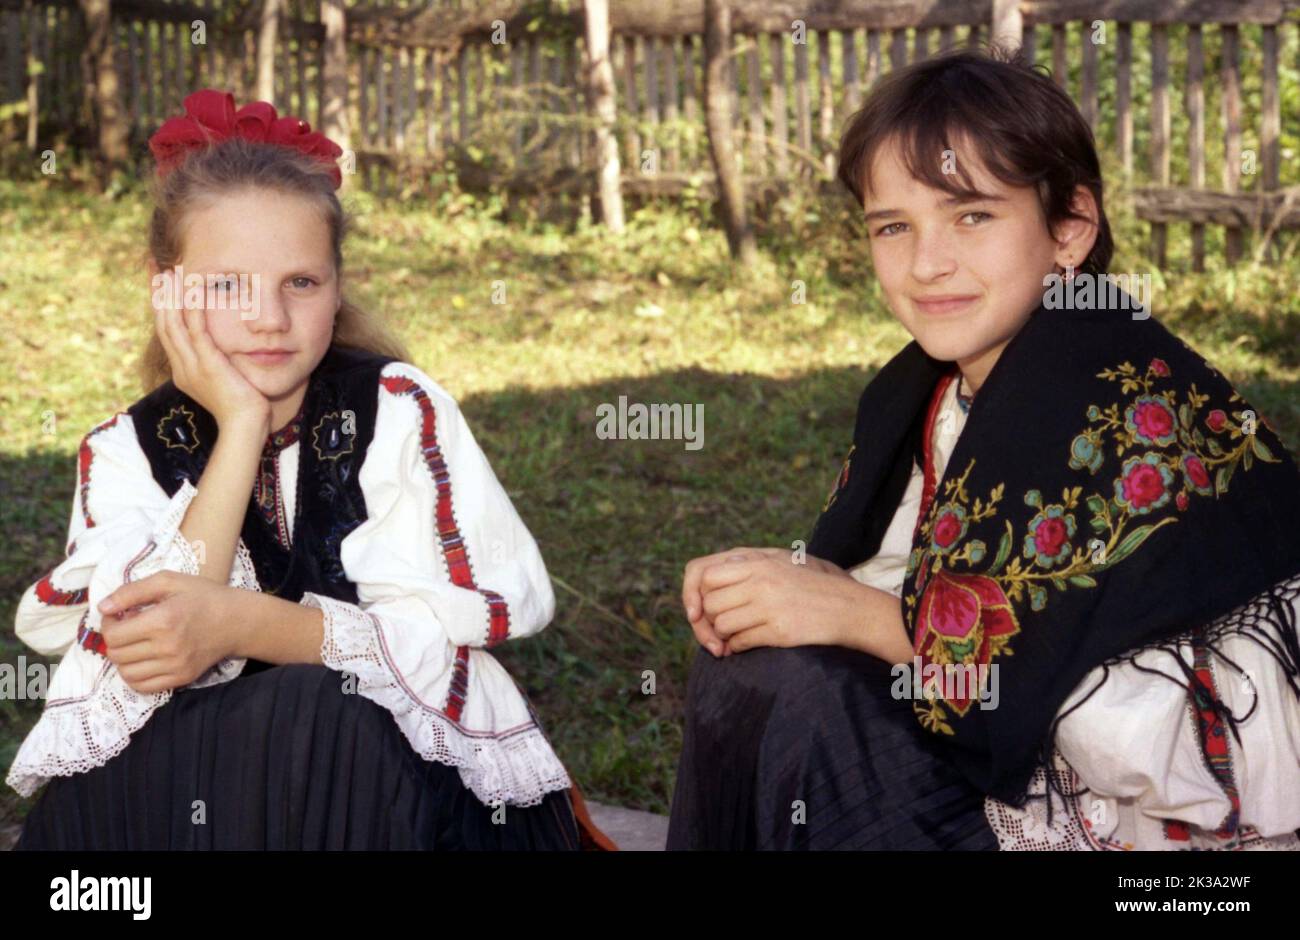 Poșaga, Alba County, Romania, approx. 1999. Young girls wearing authentic traditional clothing. Stock Photo